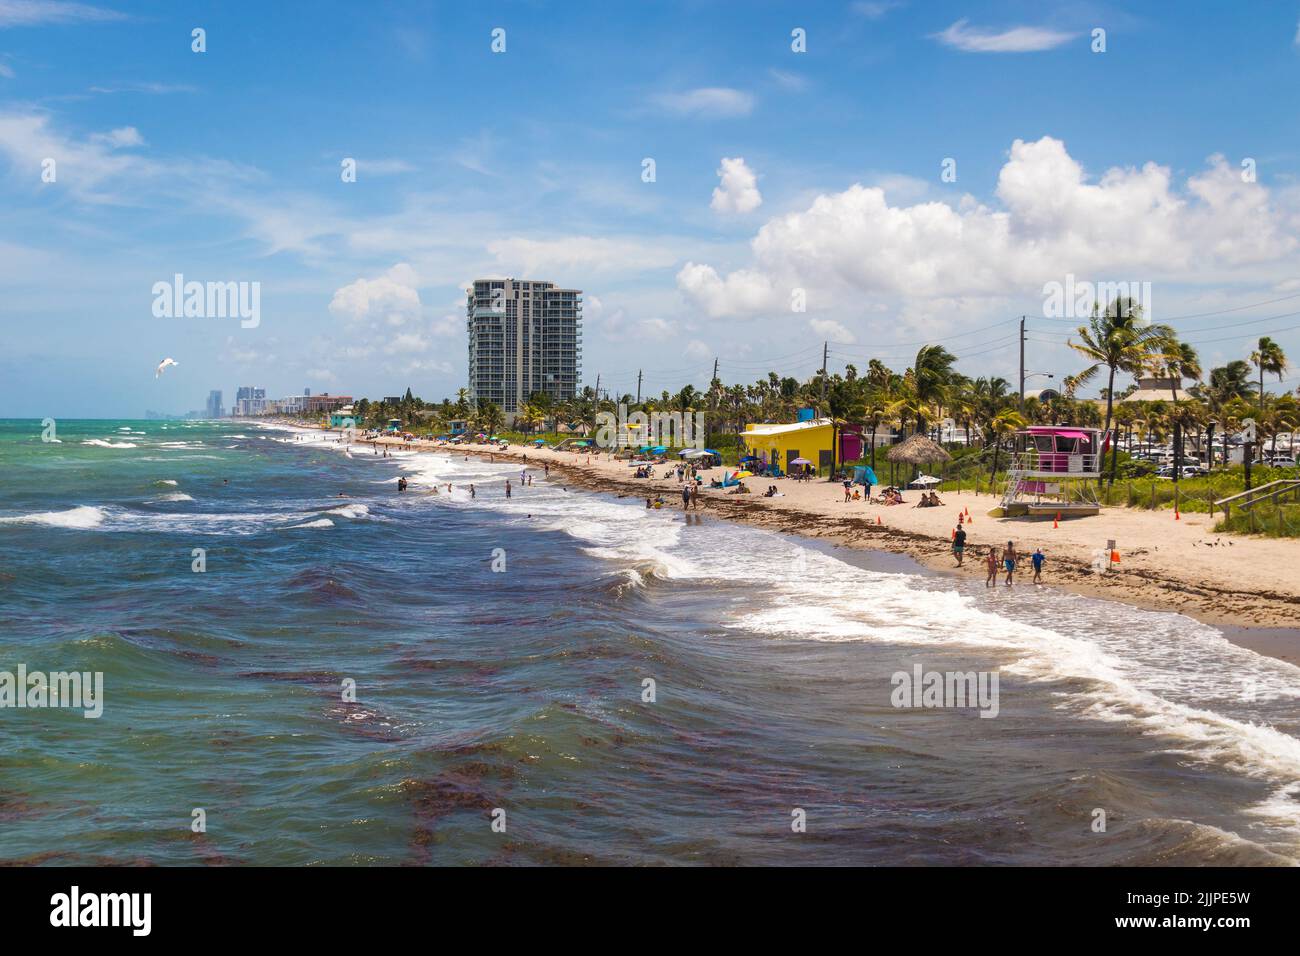 Dania Beach, Florida, USA - July 17, 2022: View of public beach of Dania Beach landscape in summer windy afternoon Stock Photo